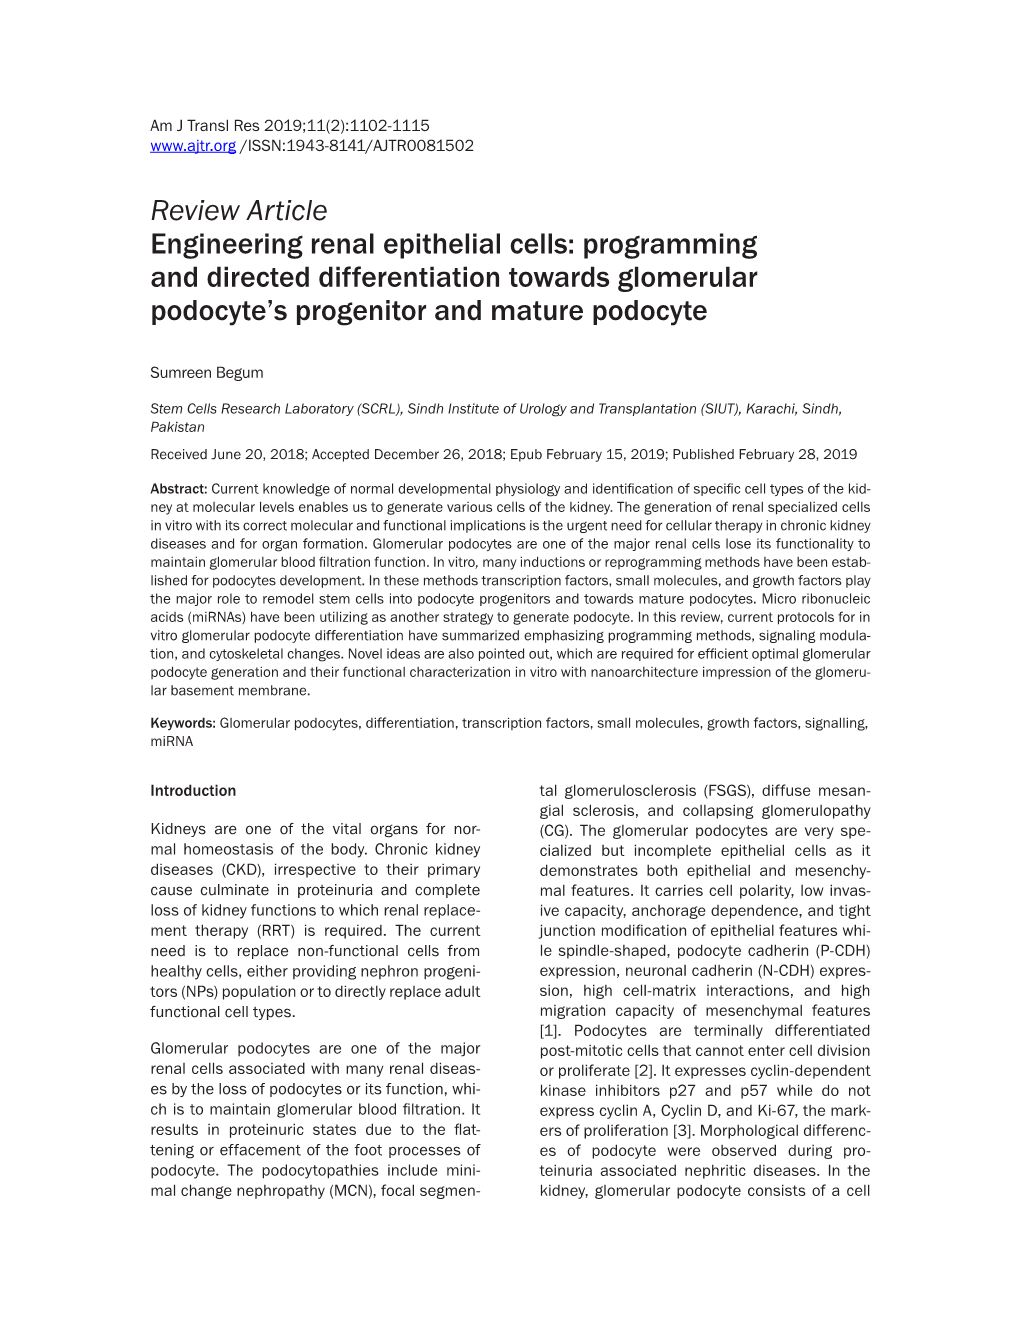 Review Article Engineering Renal Epithelial Cells: Programming and Directed Differentiation Towards Glomerular Podocyte’S Progenitor and Mature Podocyte